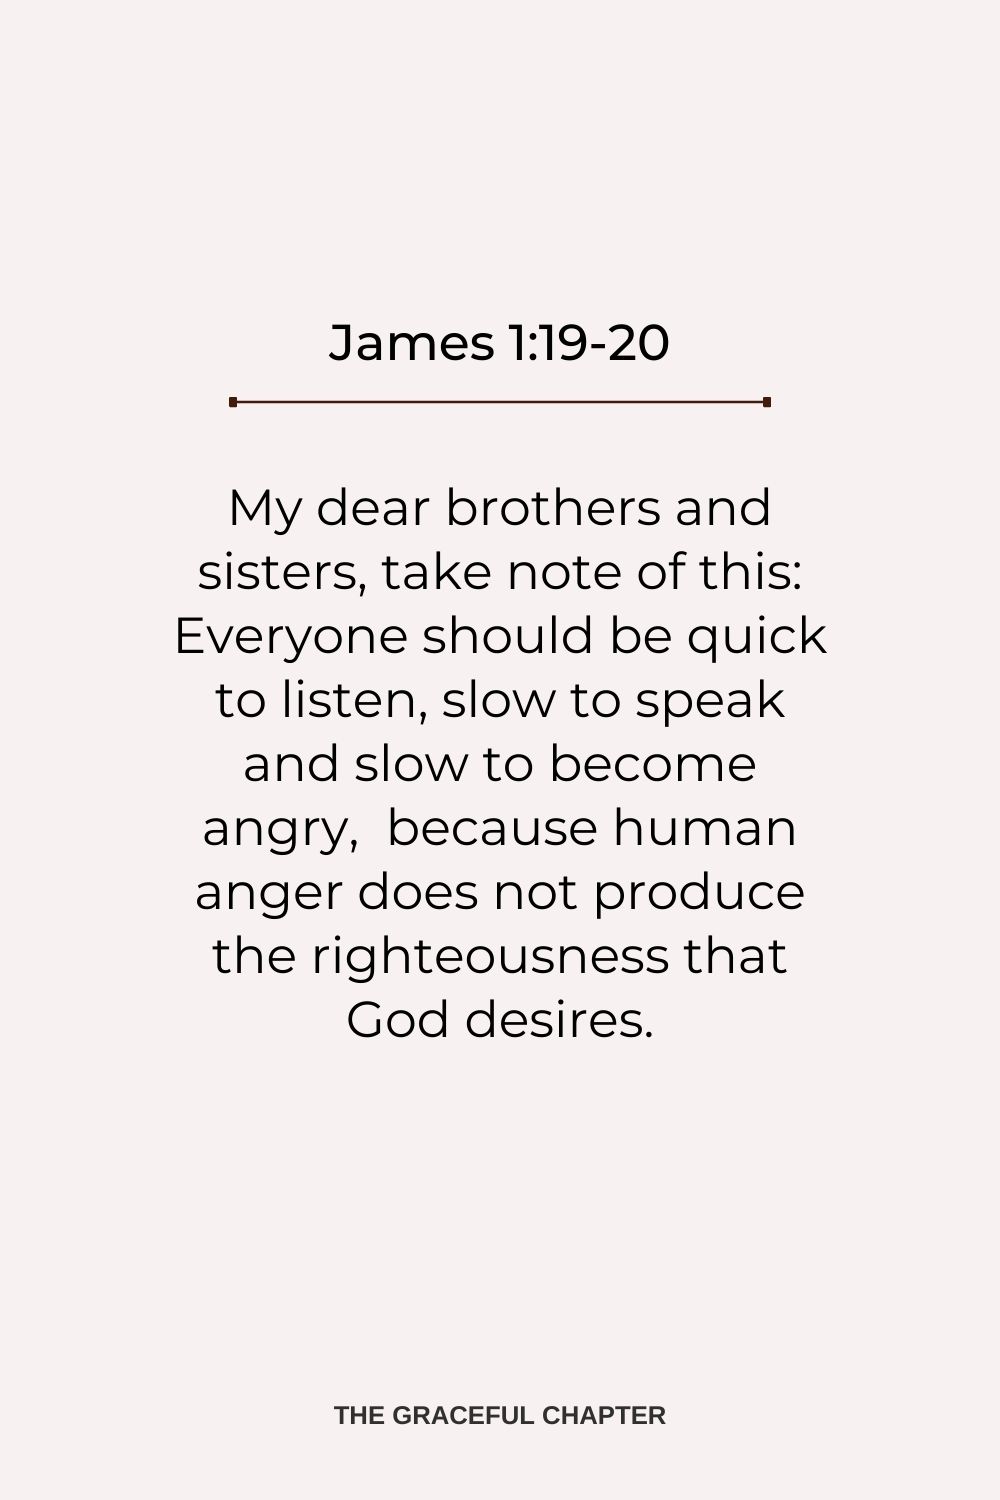 My dear brothers and sisters, take note of this: Everyone should be quick to listen, slow to speak and slow to become angry,  because human anger does not produce the righteousness that God desires. James 1:19-20